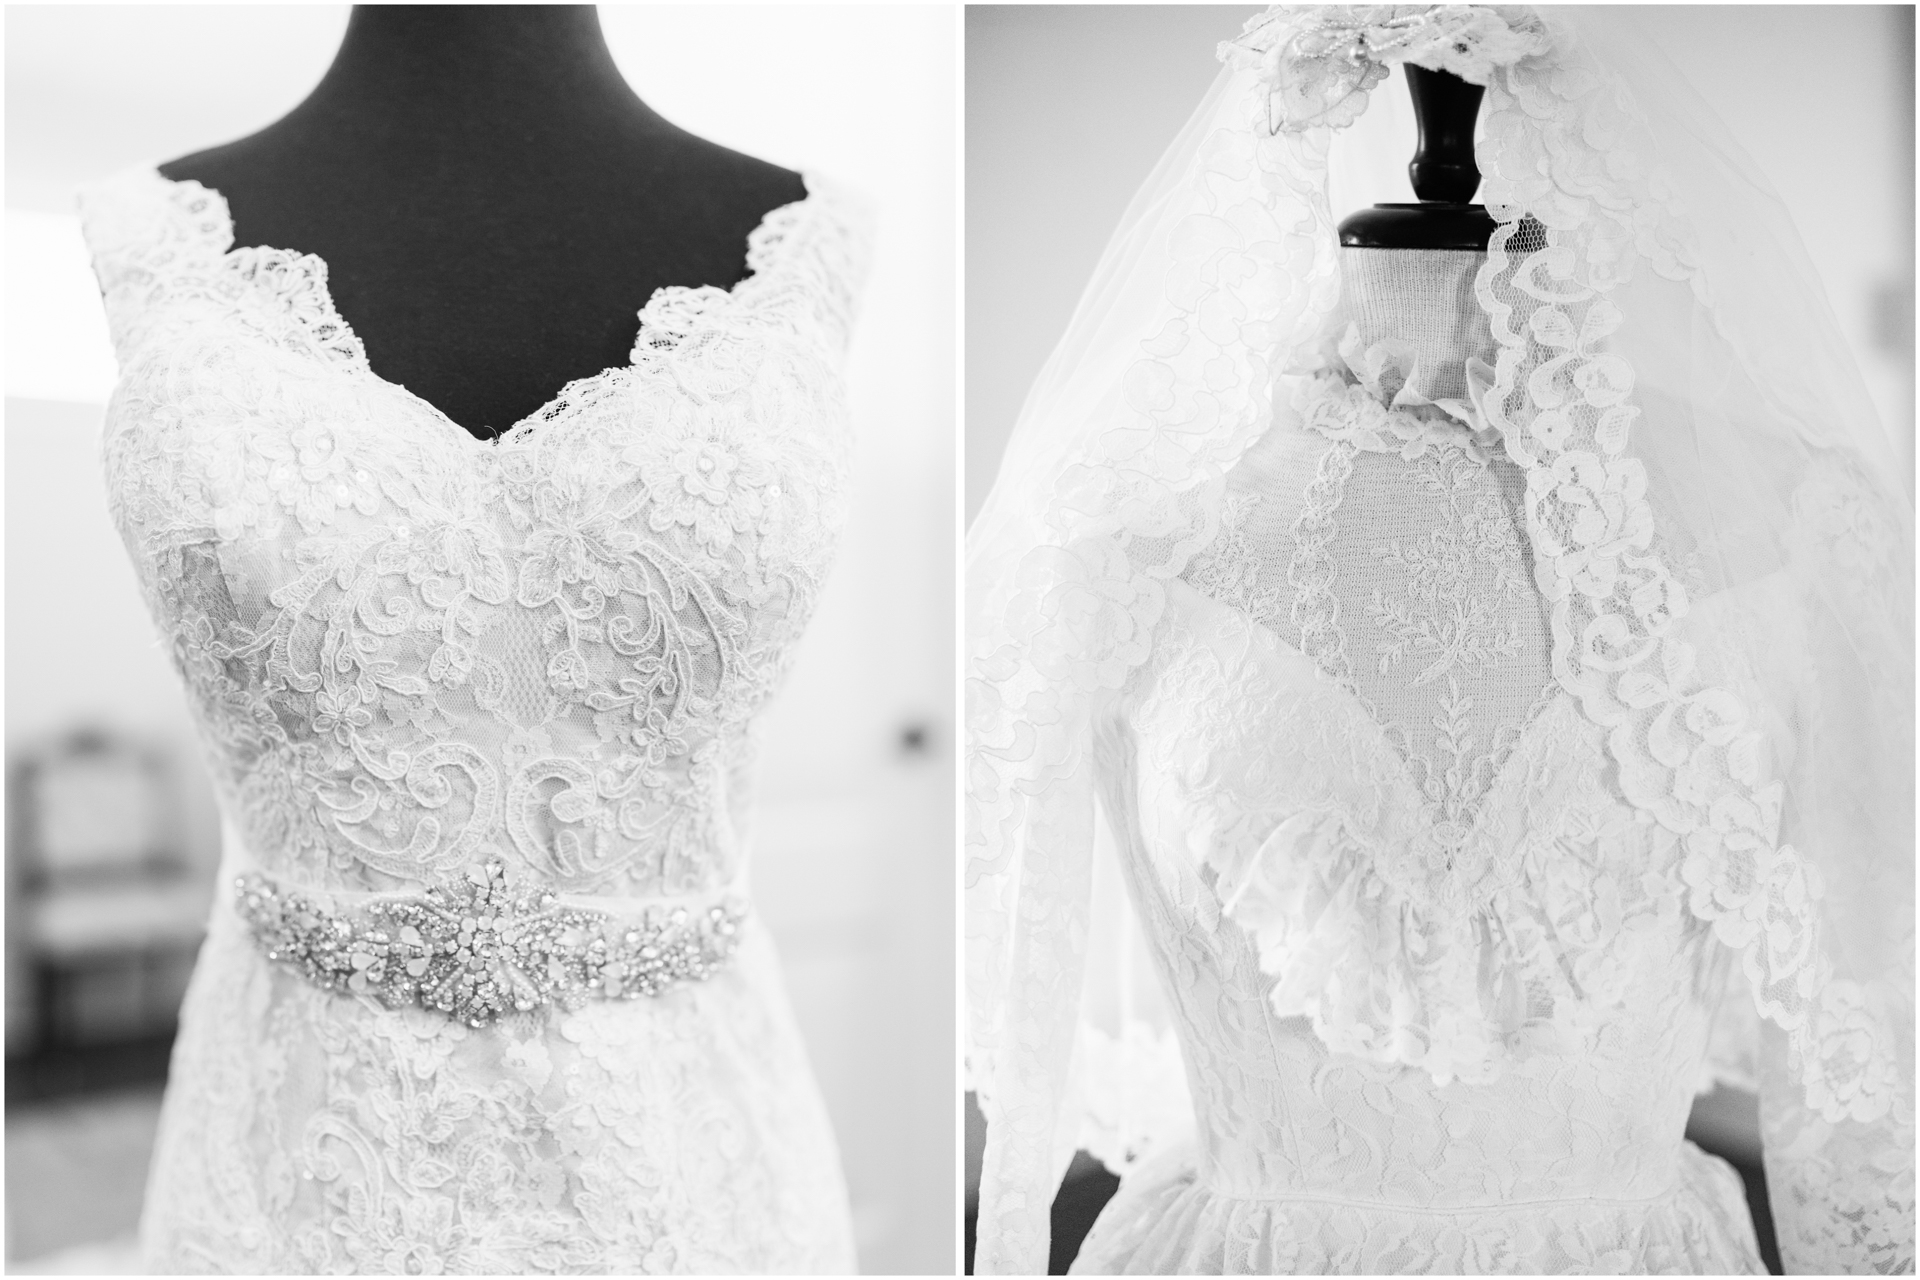 Black and White images of wedding gown - mother of the brides wedding gown